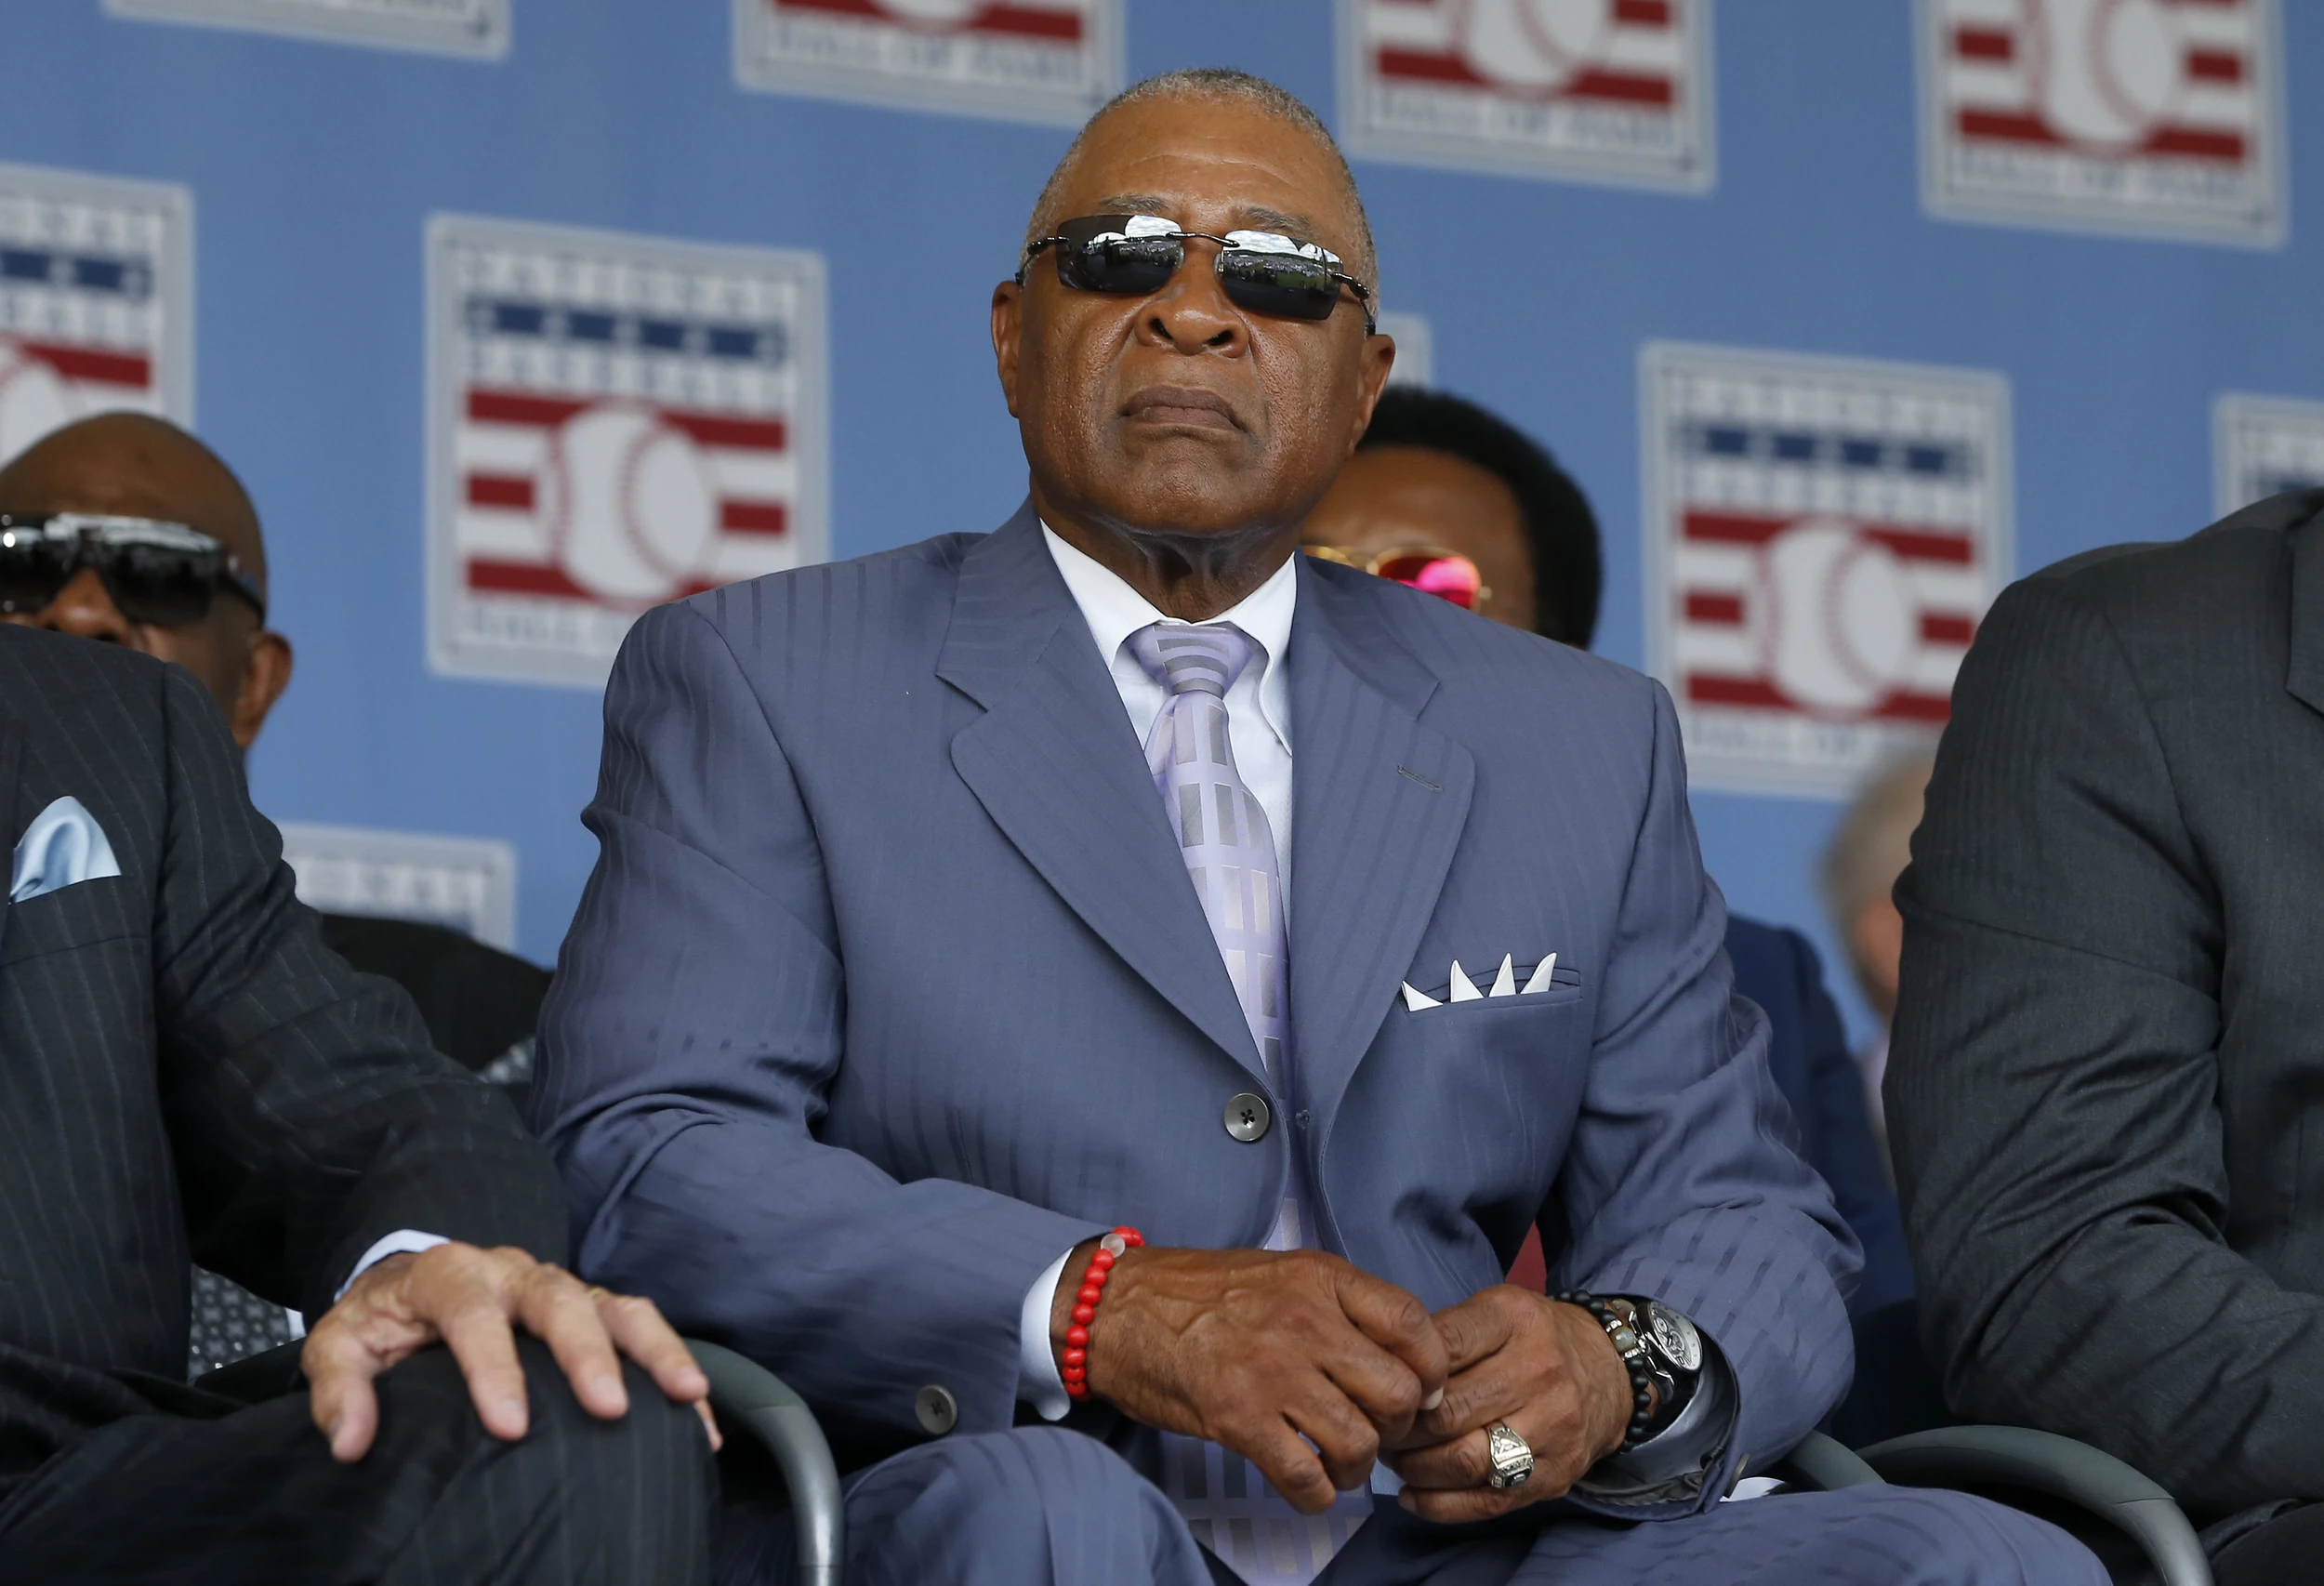 Fergie Jenkins, Ozzie Smith to manage Hall of Fame Classic game